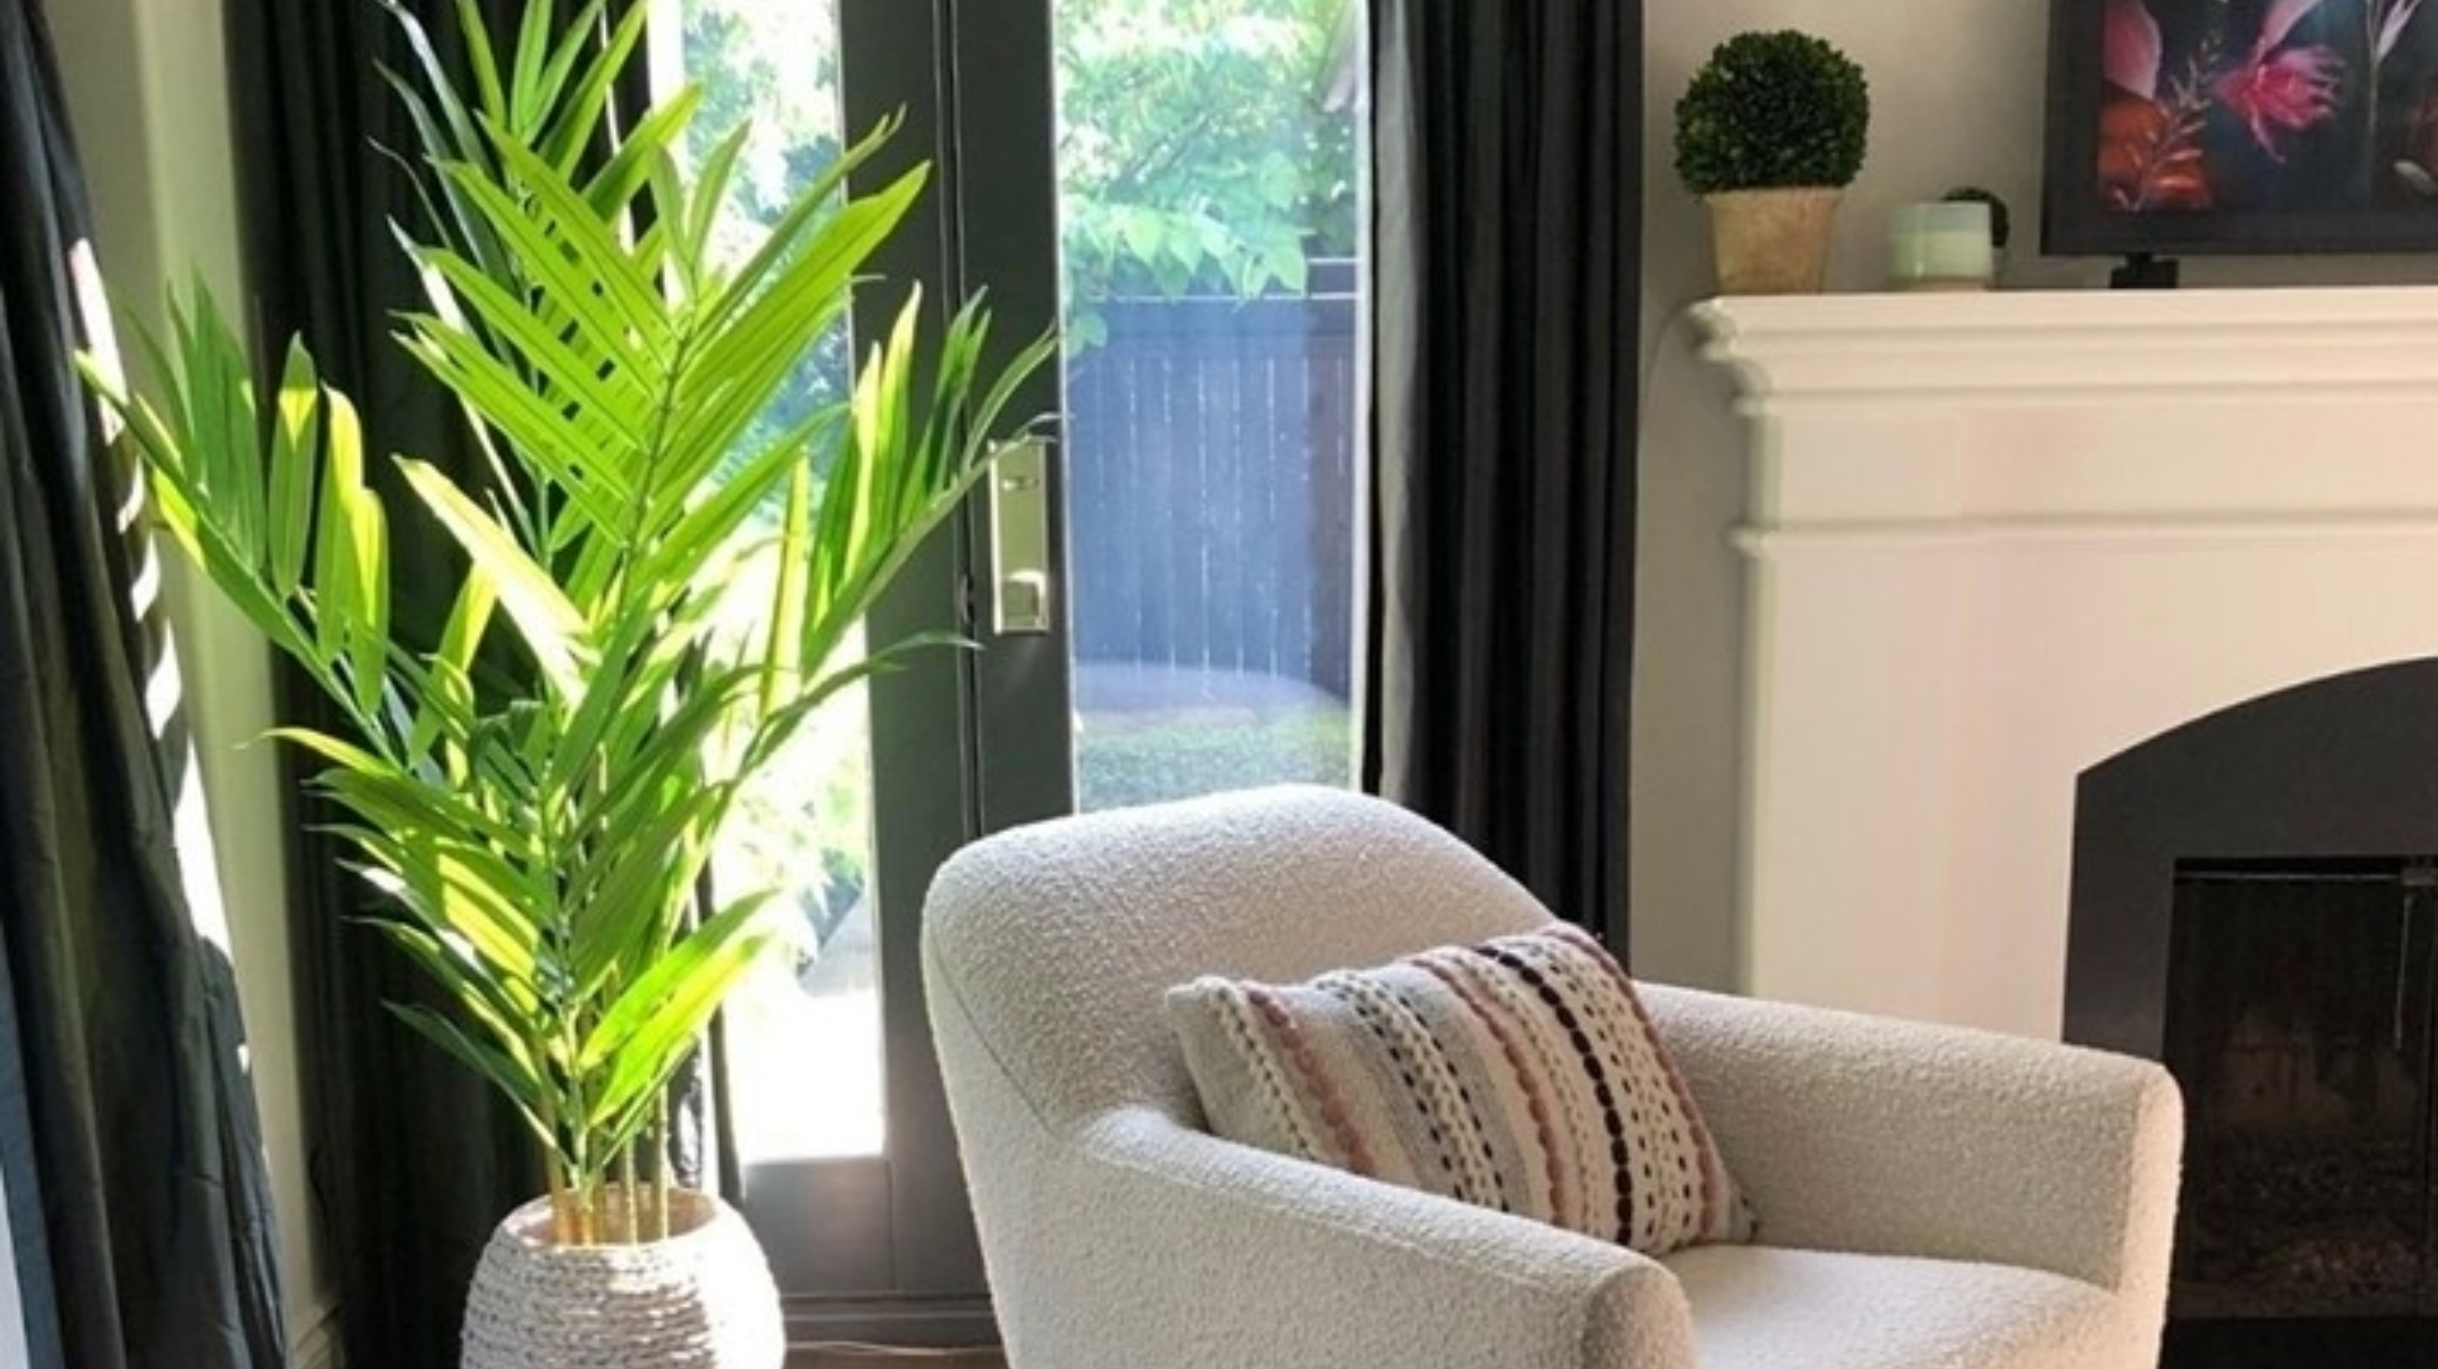 Where In Your Home Can You Put A Fake Plant To Add Style?